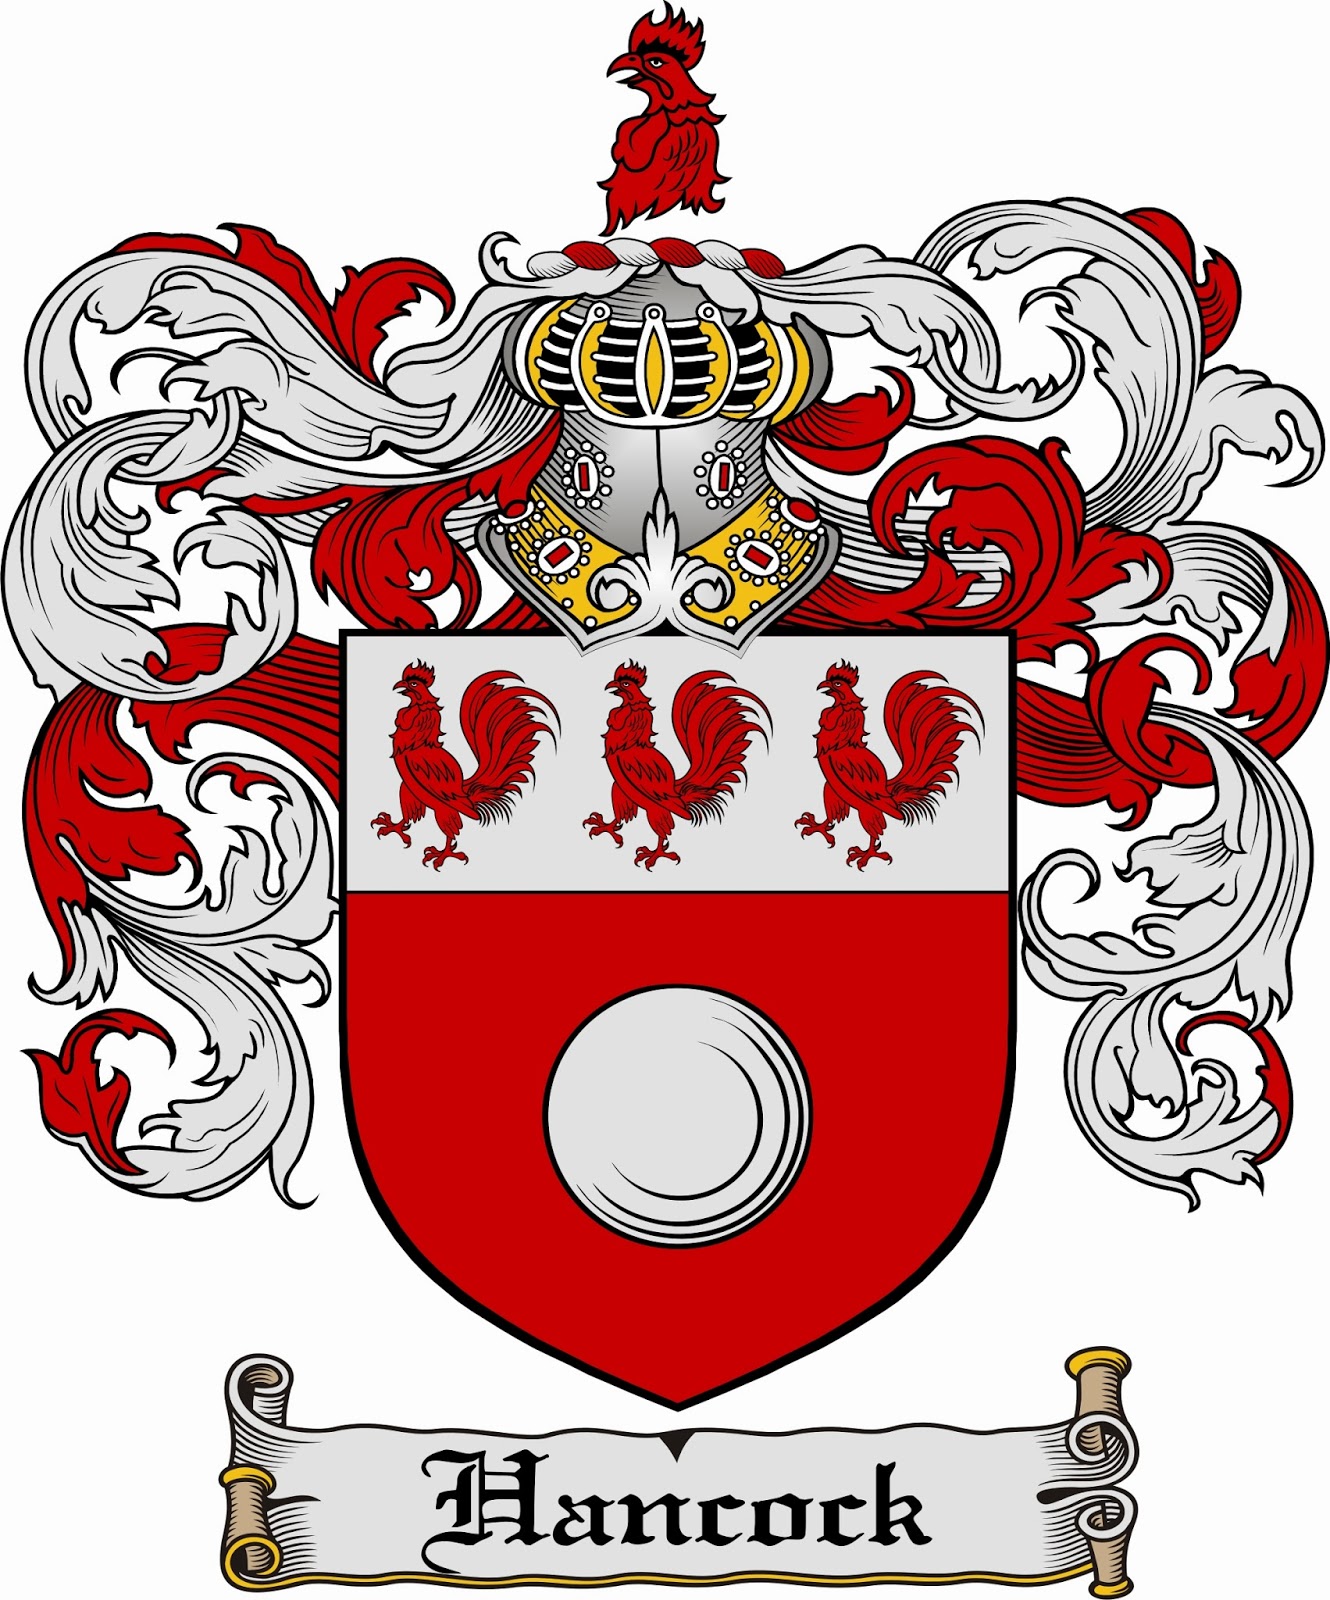 The Good Report: Find Your Family Crest and Coat of Arms